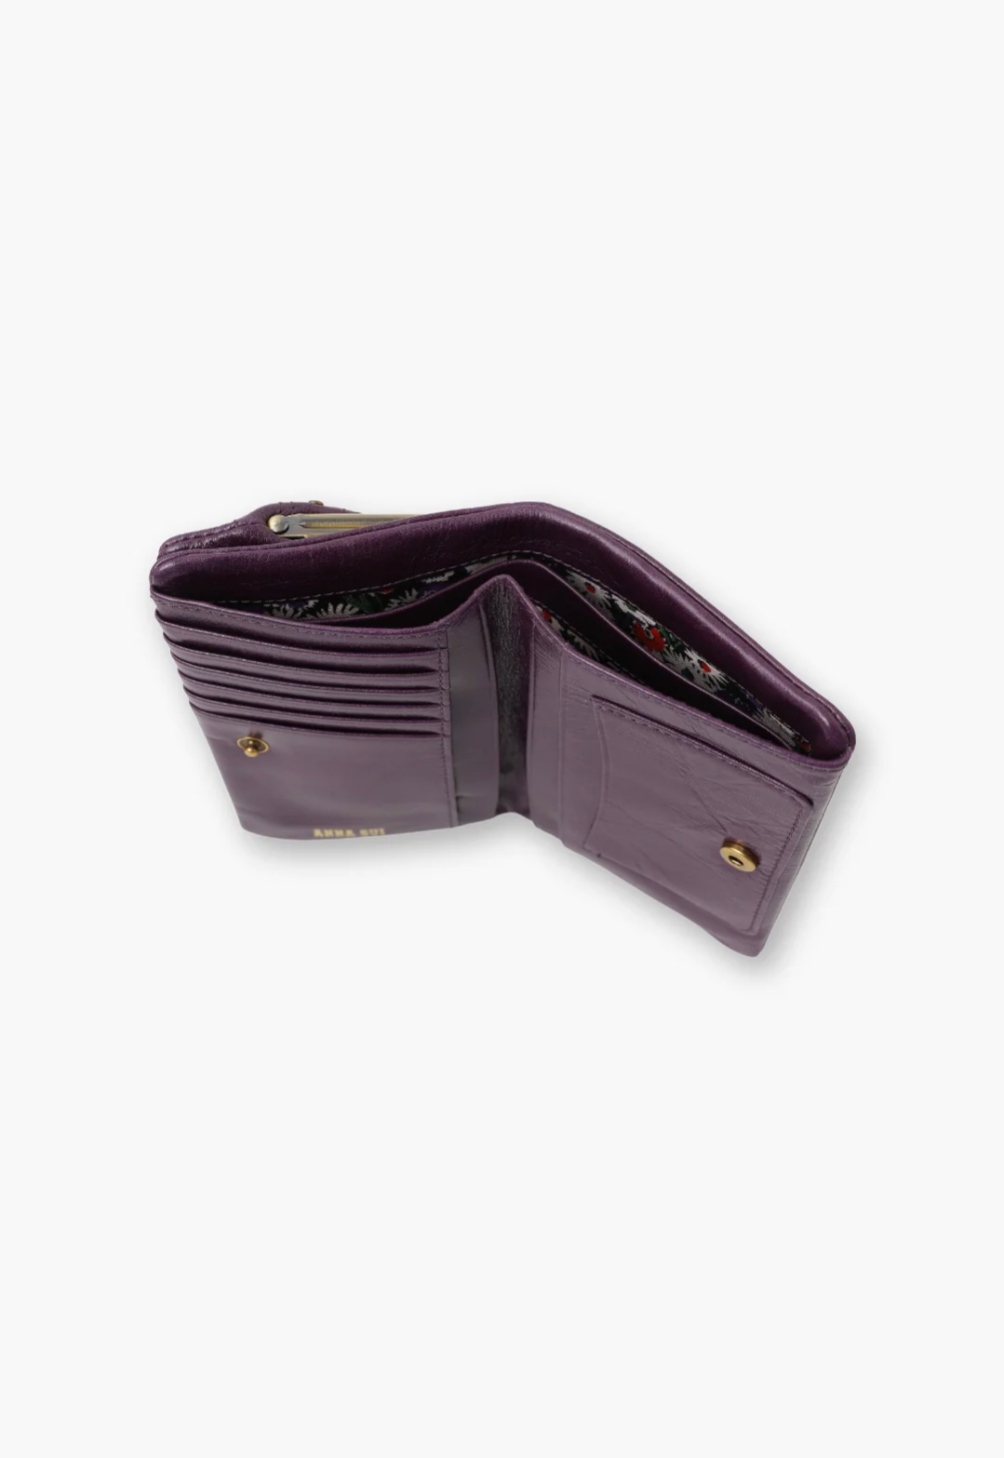 Wallet purple, 7 card slots, 4 open pockets, 2 divided bill slots and 1 front pouch, Snap buttons